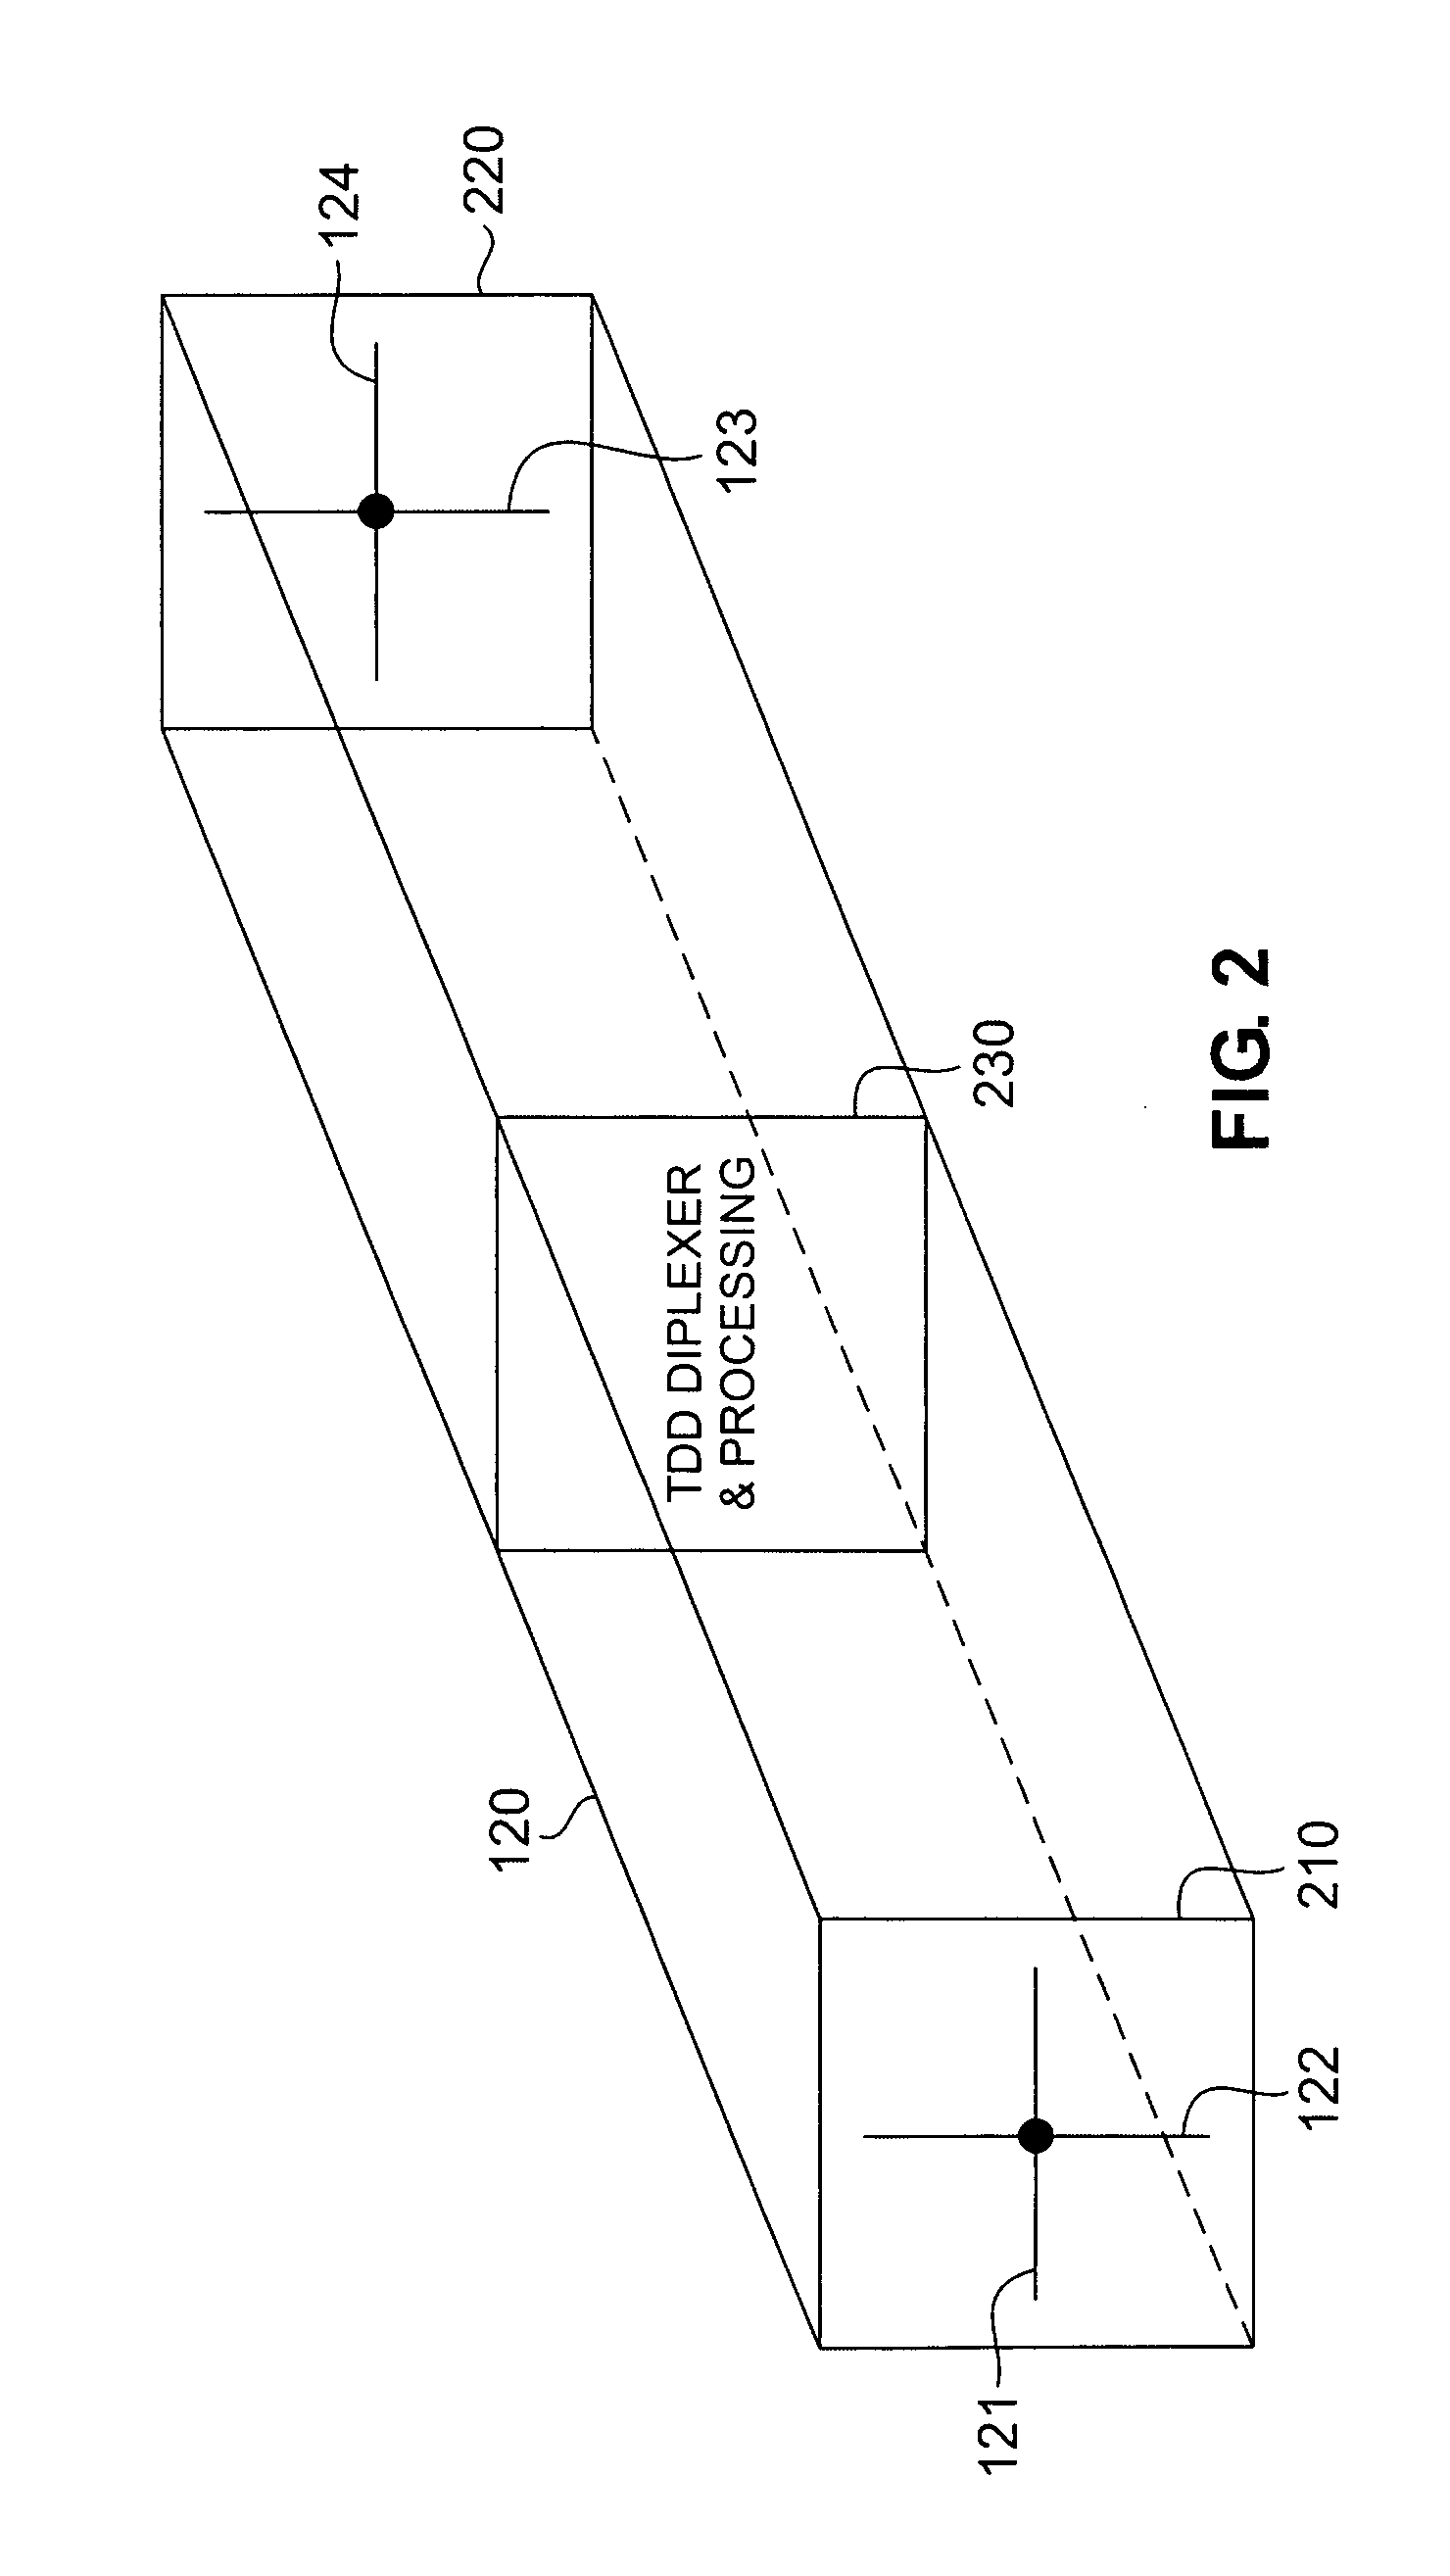 Apparatus and method for echo cancellation in a wireless repeater using cross-polarized antenna elements